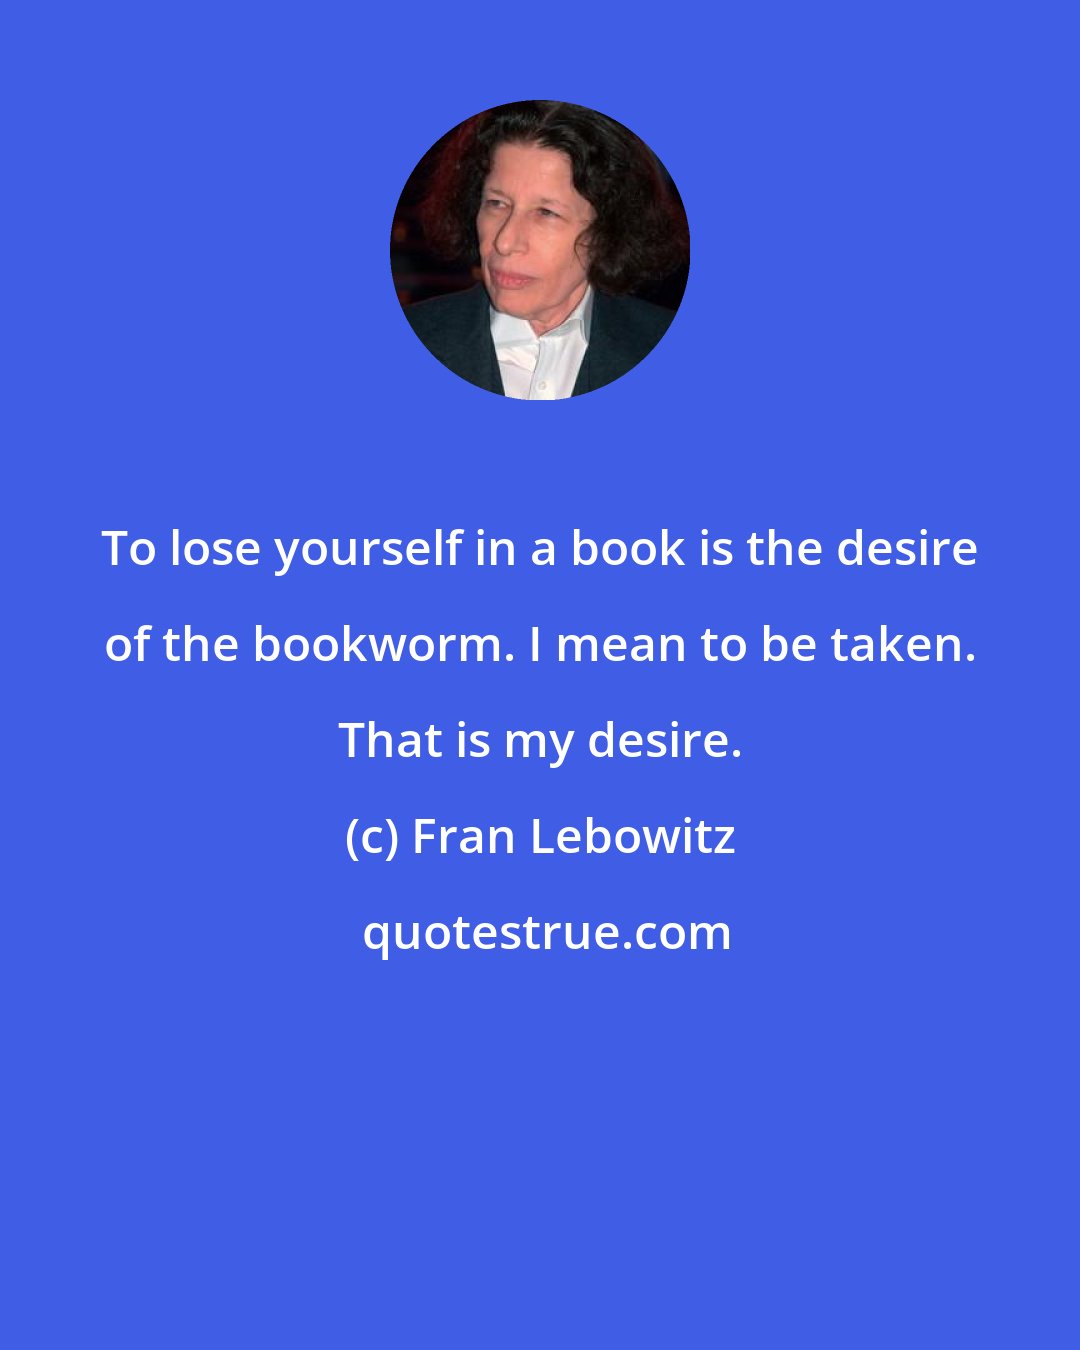 Fran Lebowitz: To lose yourself in a book is the desire of the bookworm. I mean to be taken. That is my desire.